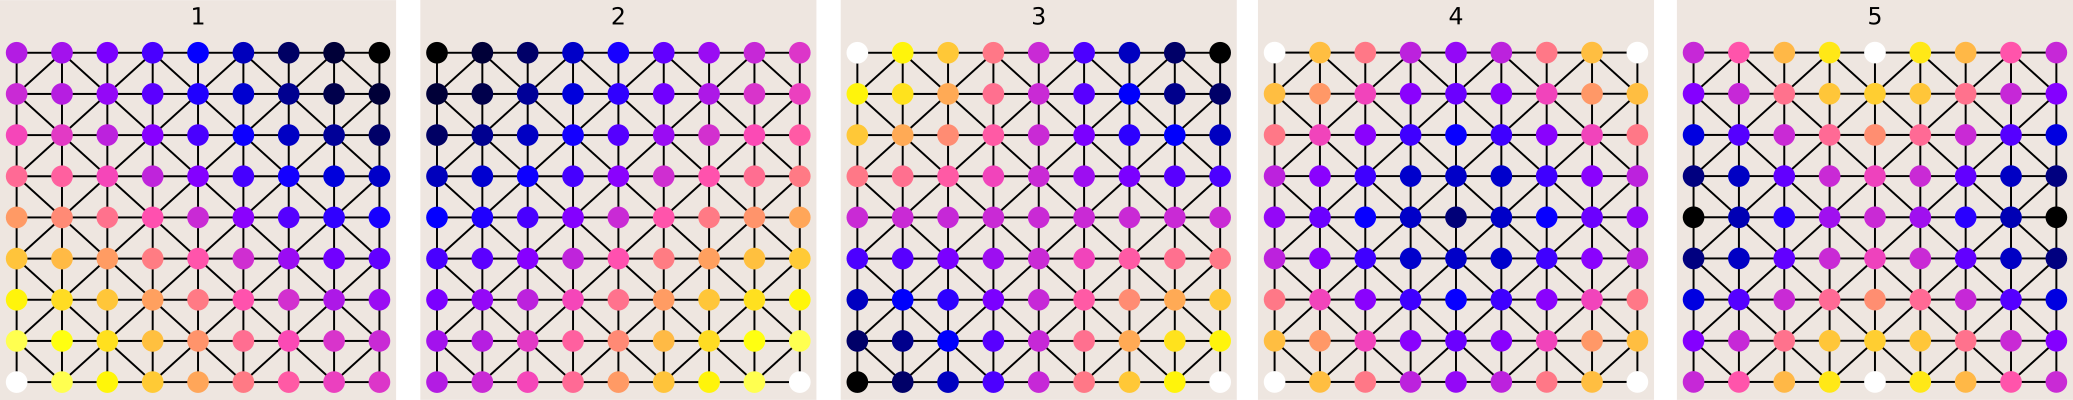 Eigenmodes of a square.